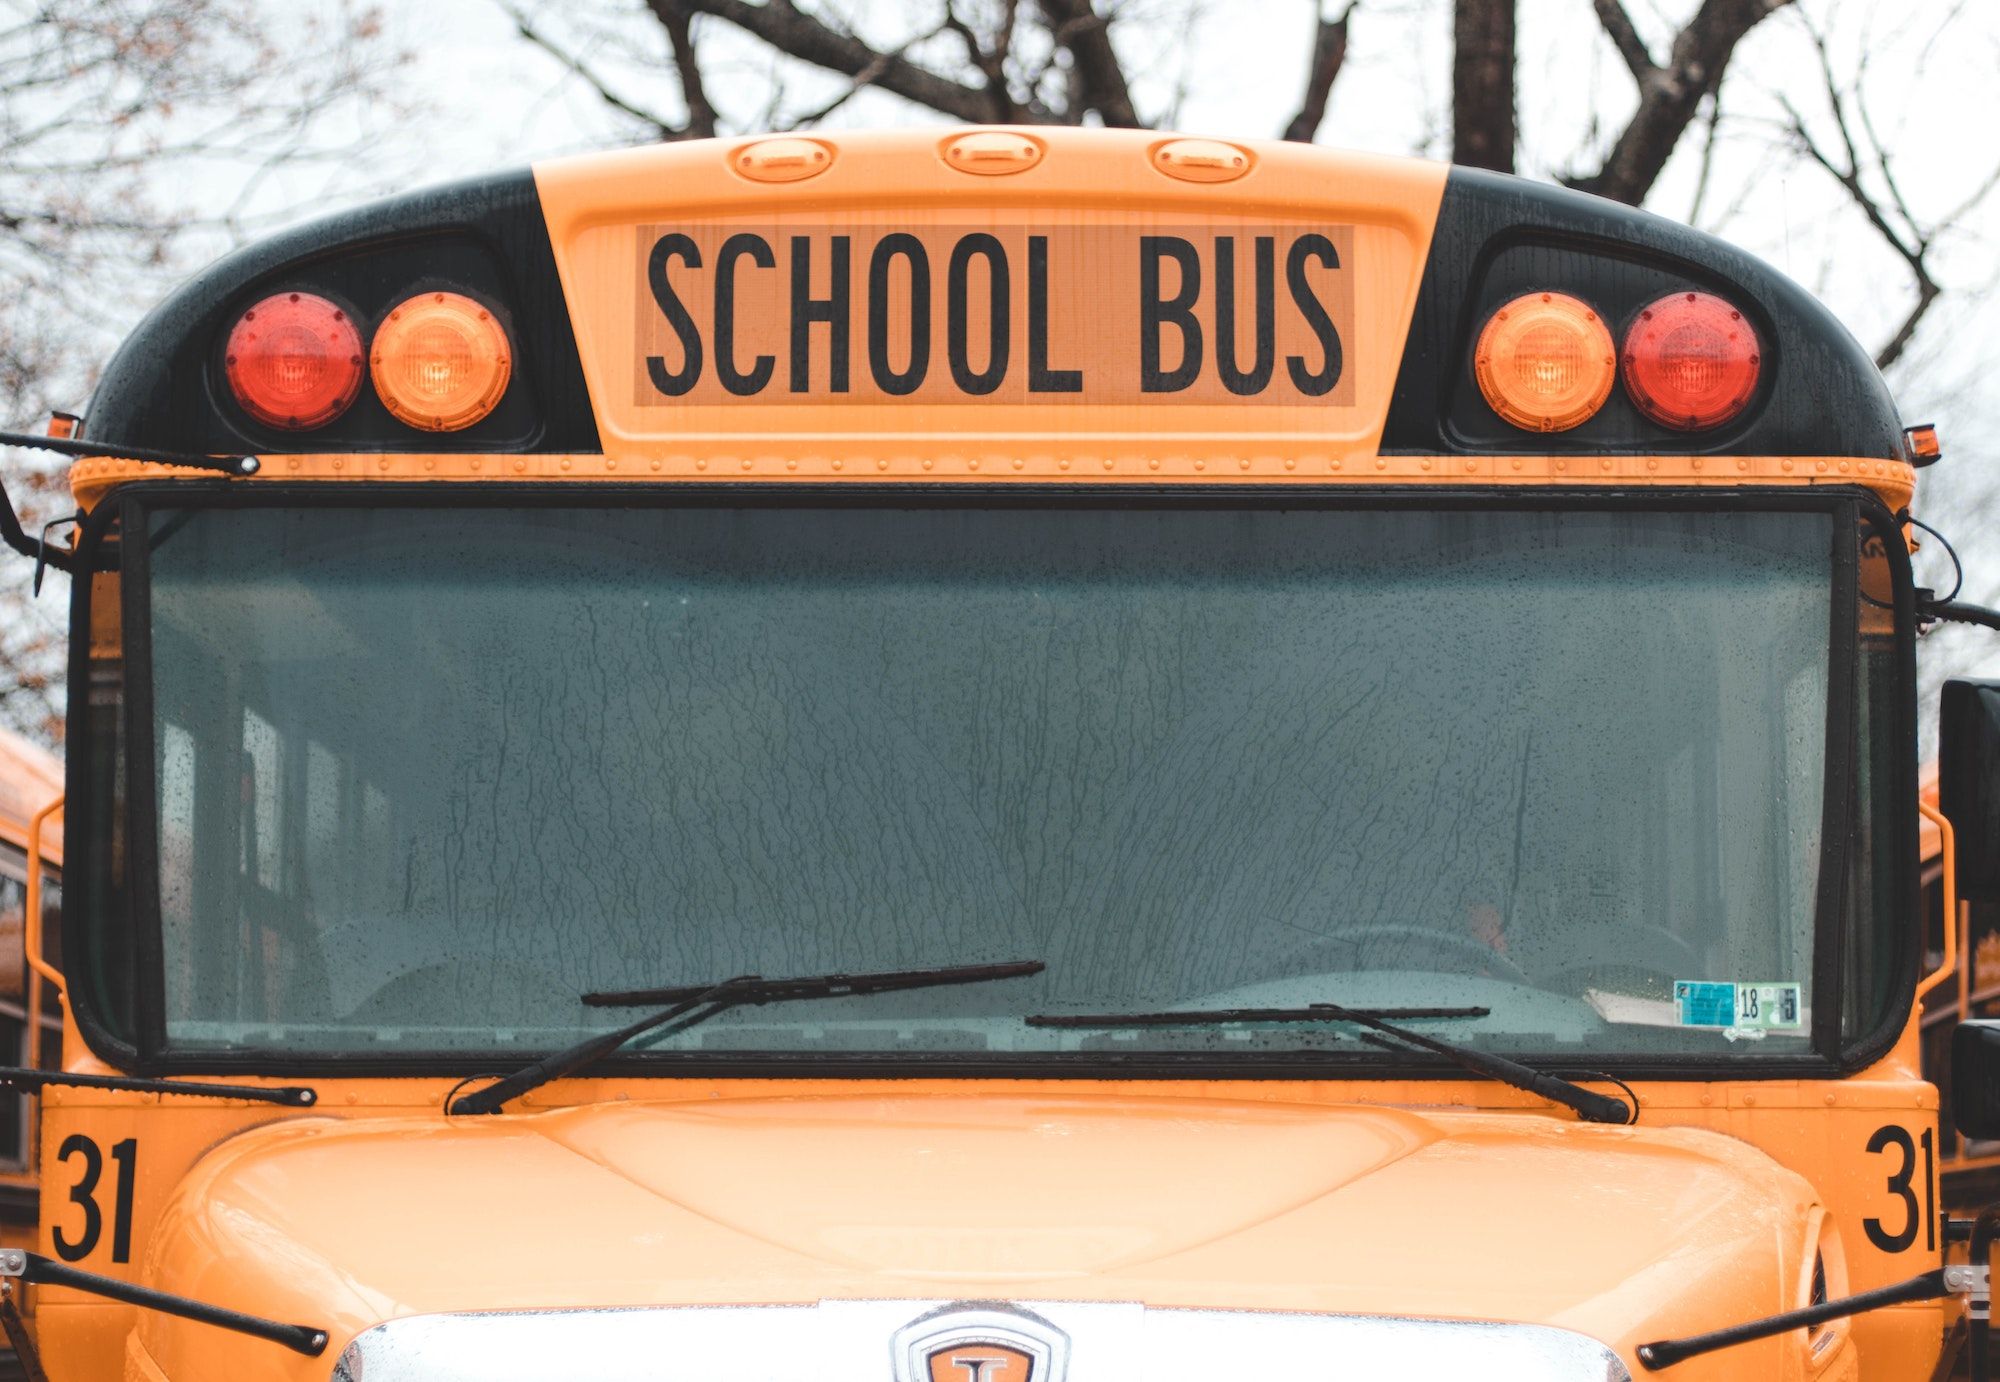 Featured Image for Scripture is true: Proof #1 (…what I learned by driving a school bus)